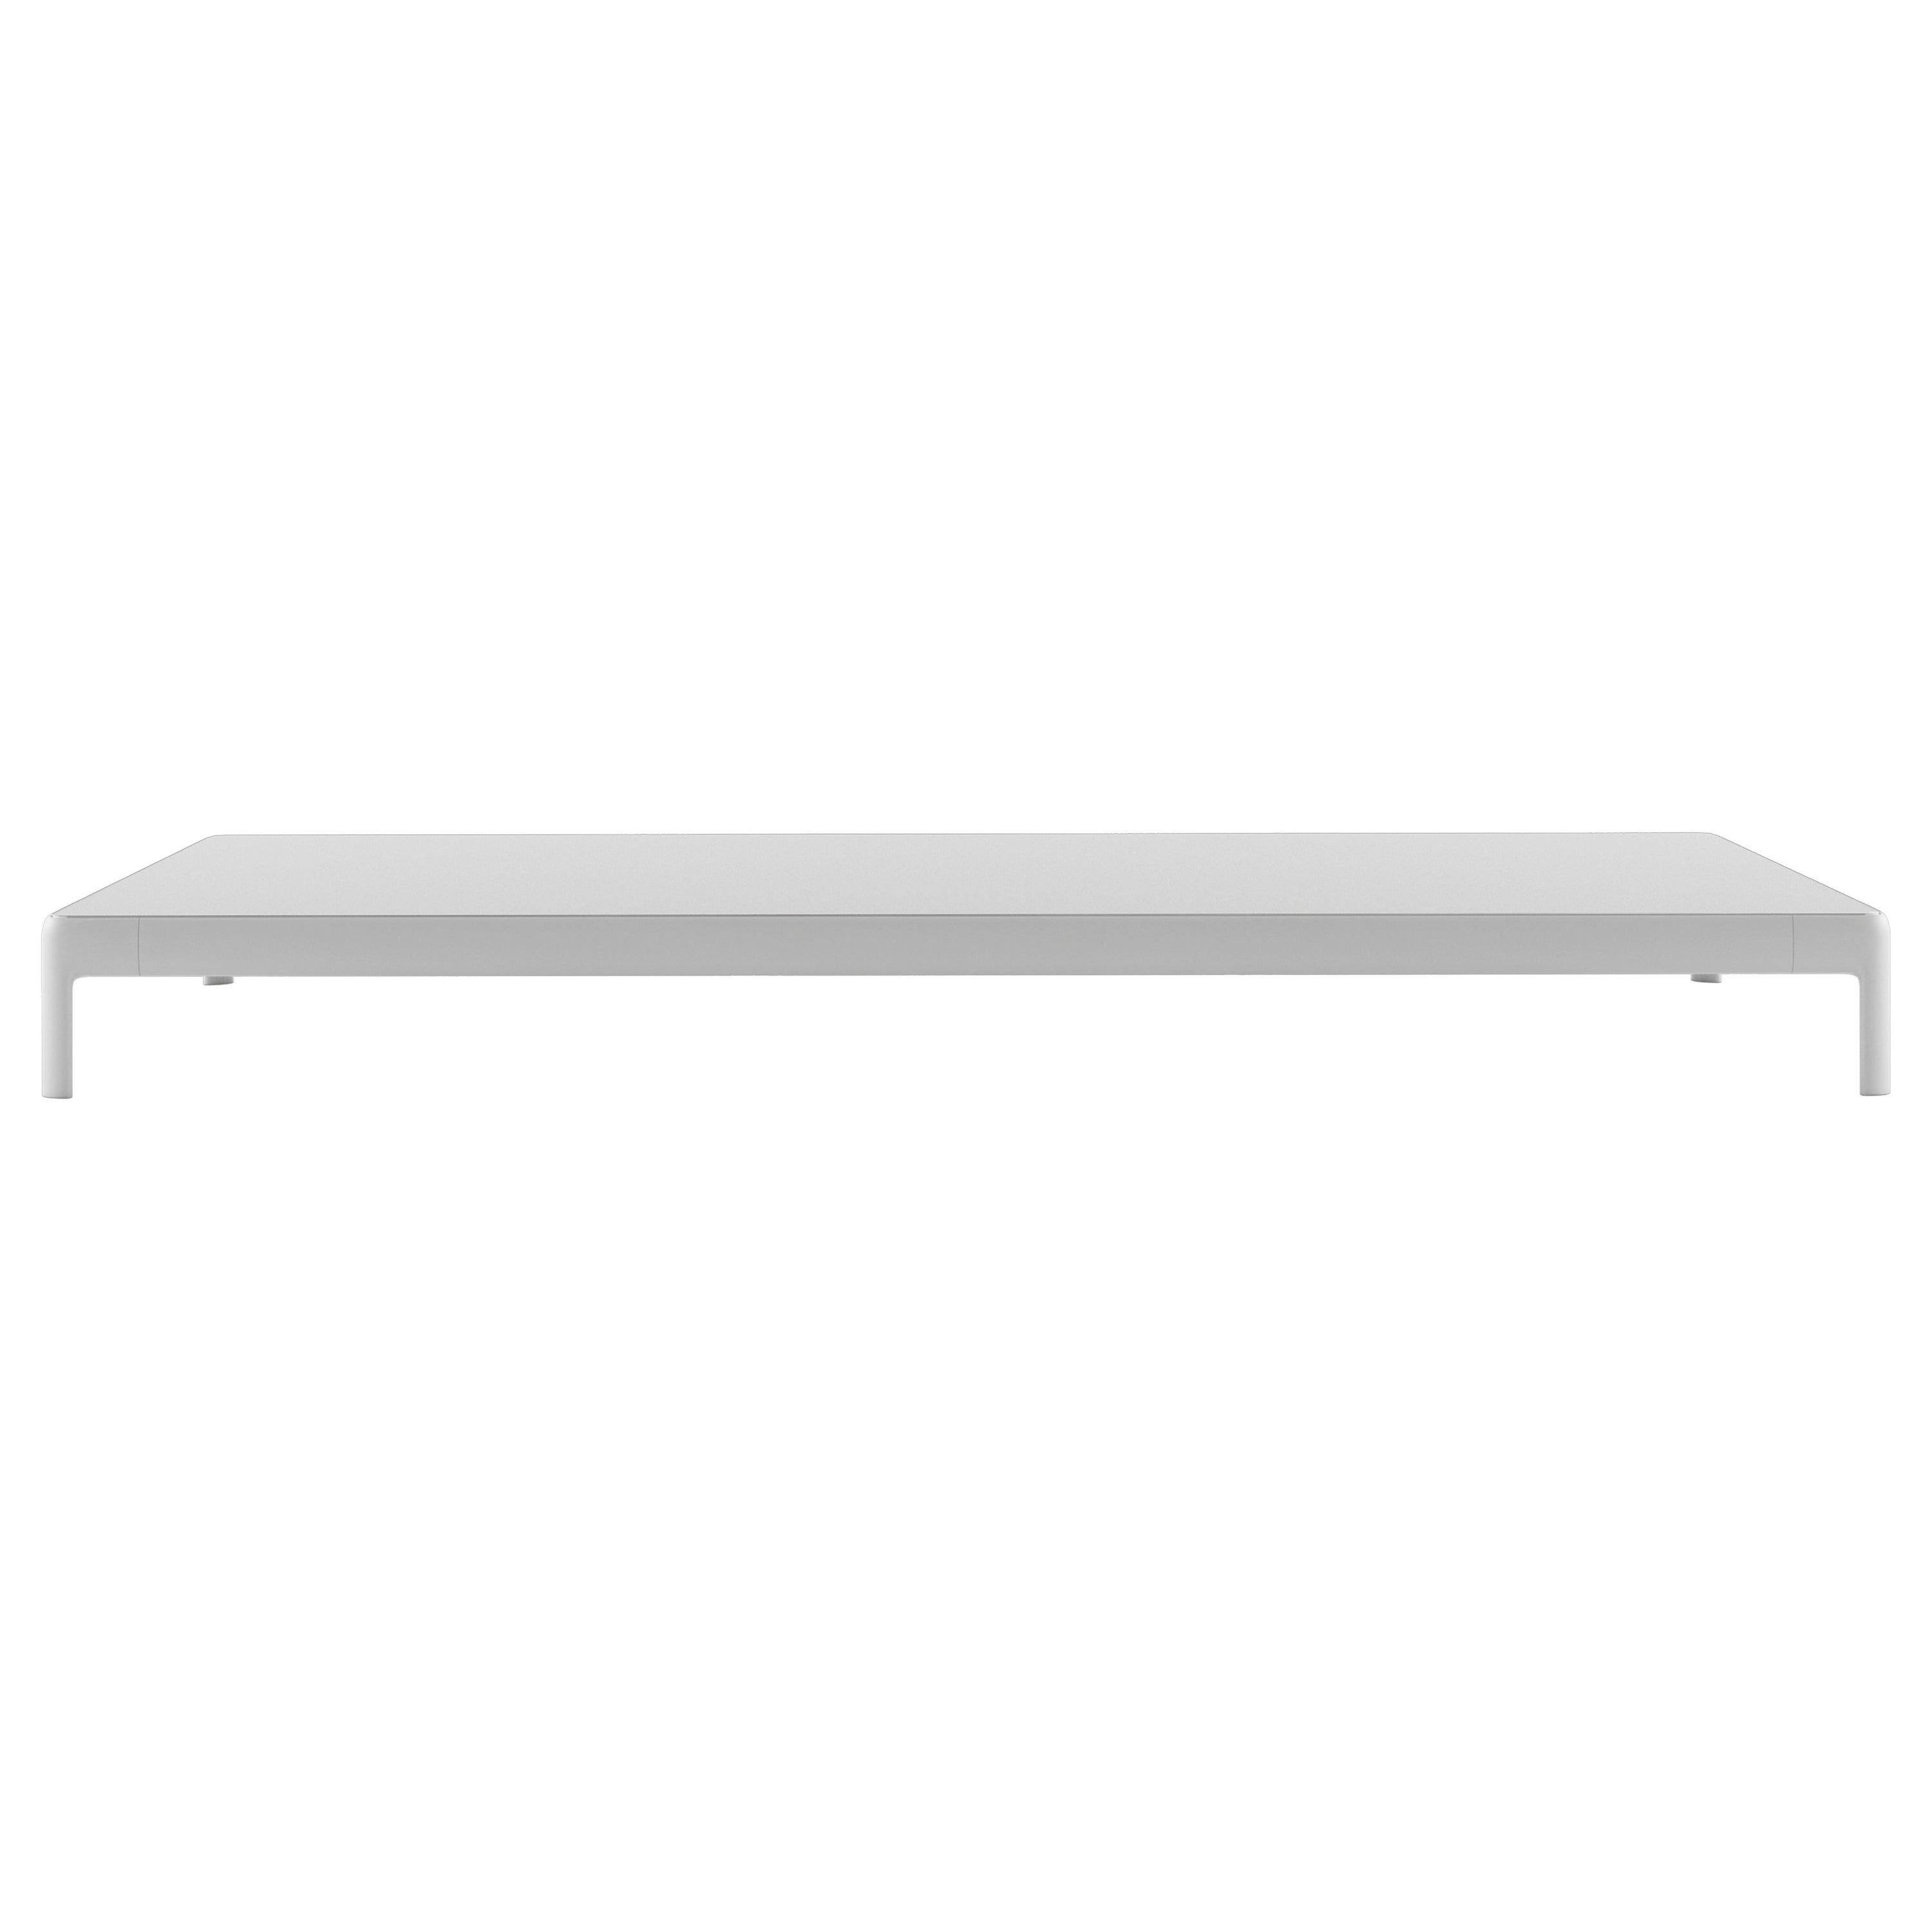 Alias P74 AluZen Soft Low Table Outdoor in White with Lacquered Aluminium Frame For Sale